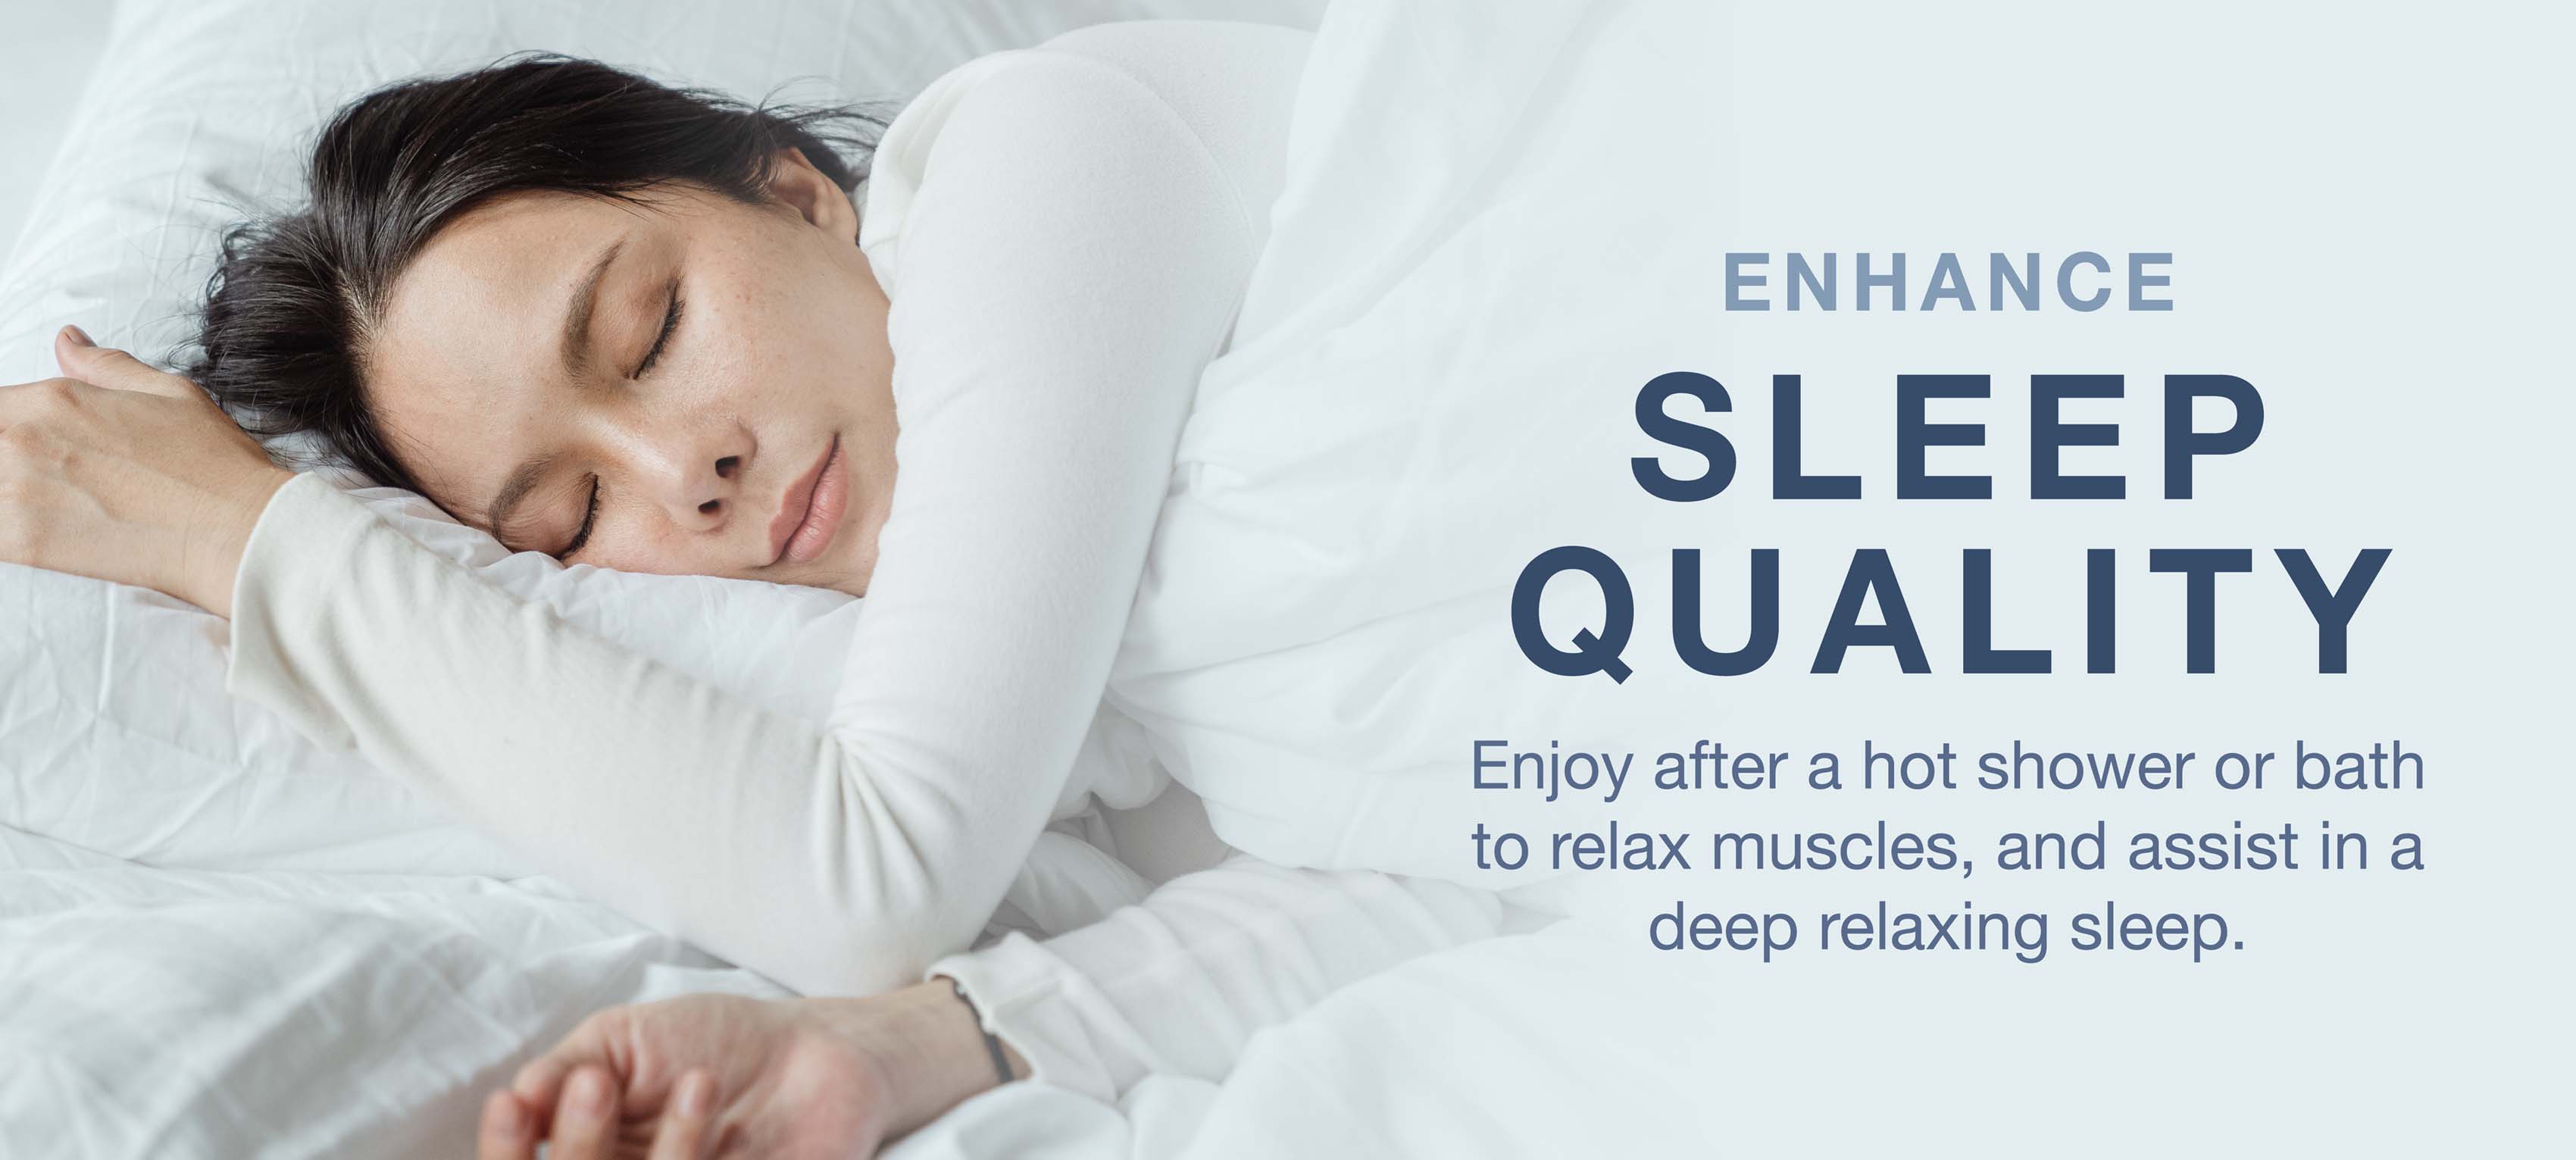 Enhance sleep quality after a hot shower or bath to relax muscles and assist in deep relaxing sleep.